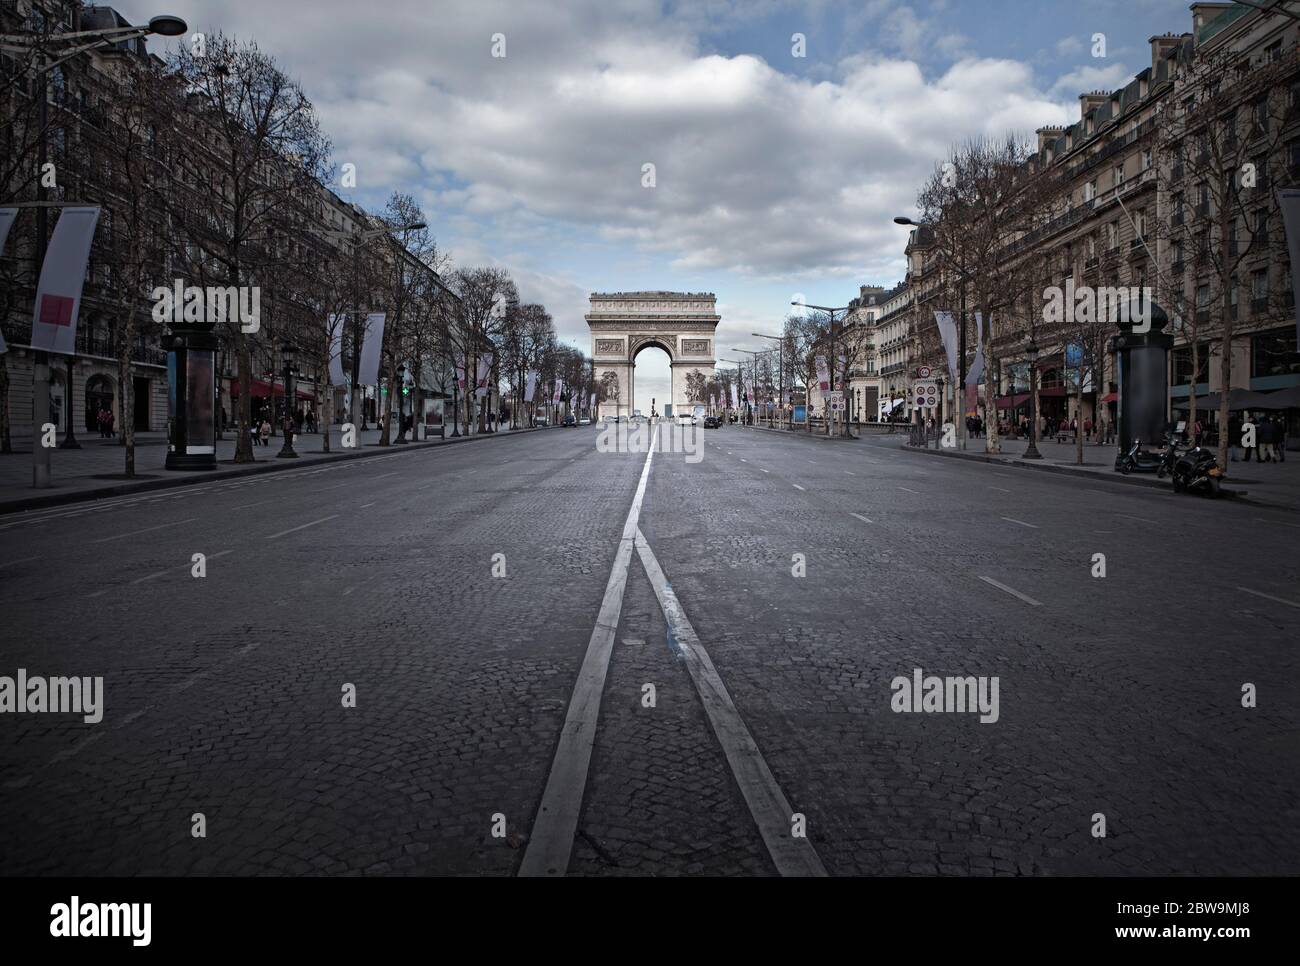 France, Paris, Street with Triumphal Arch at end Stock Photo